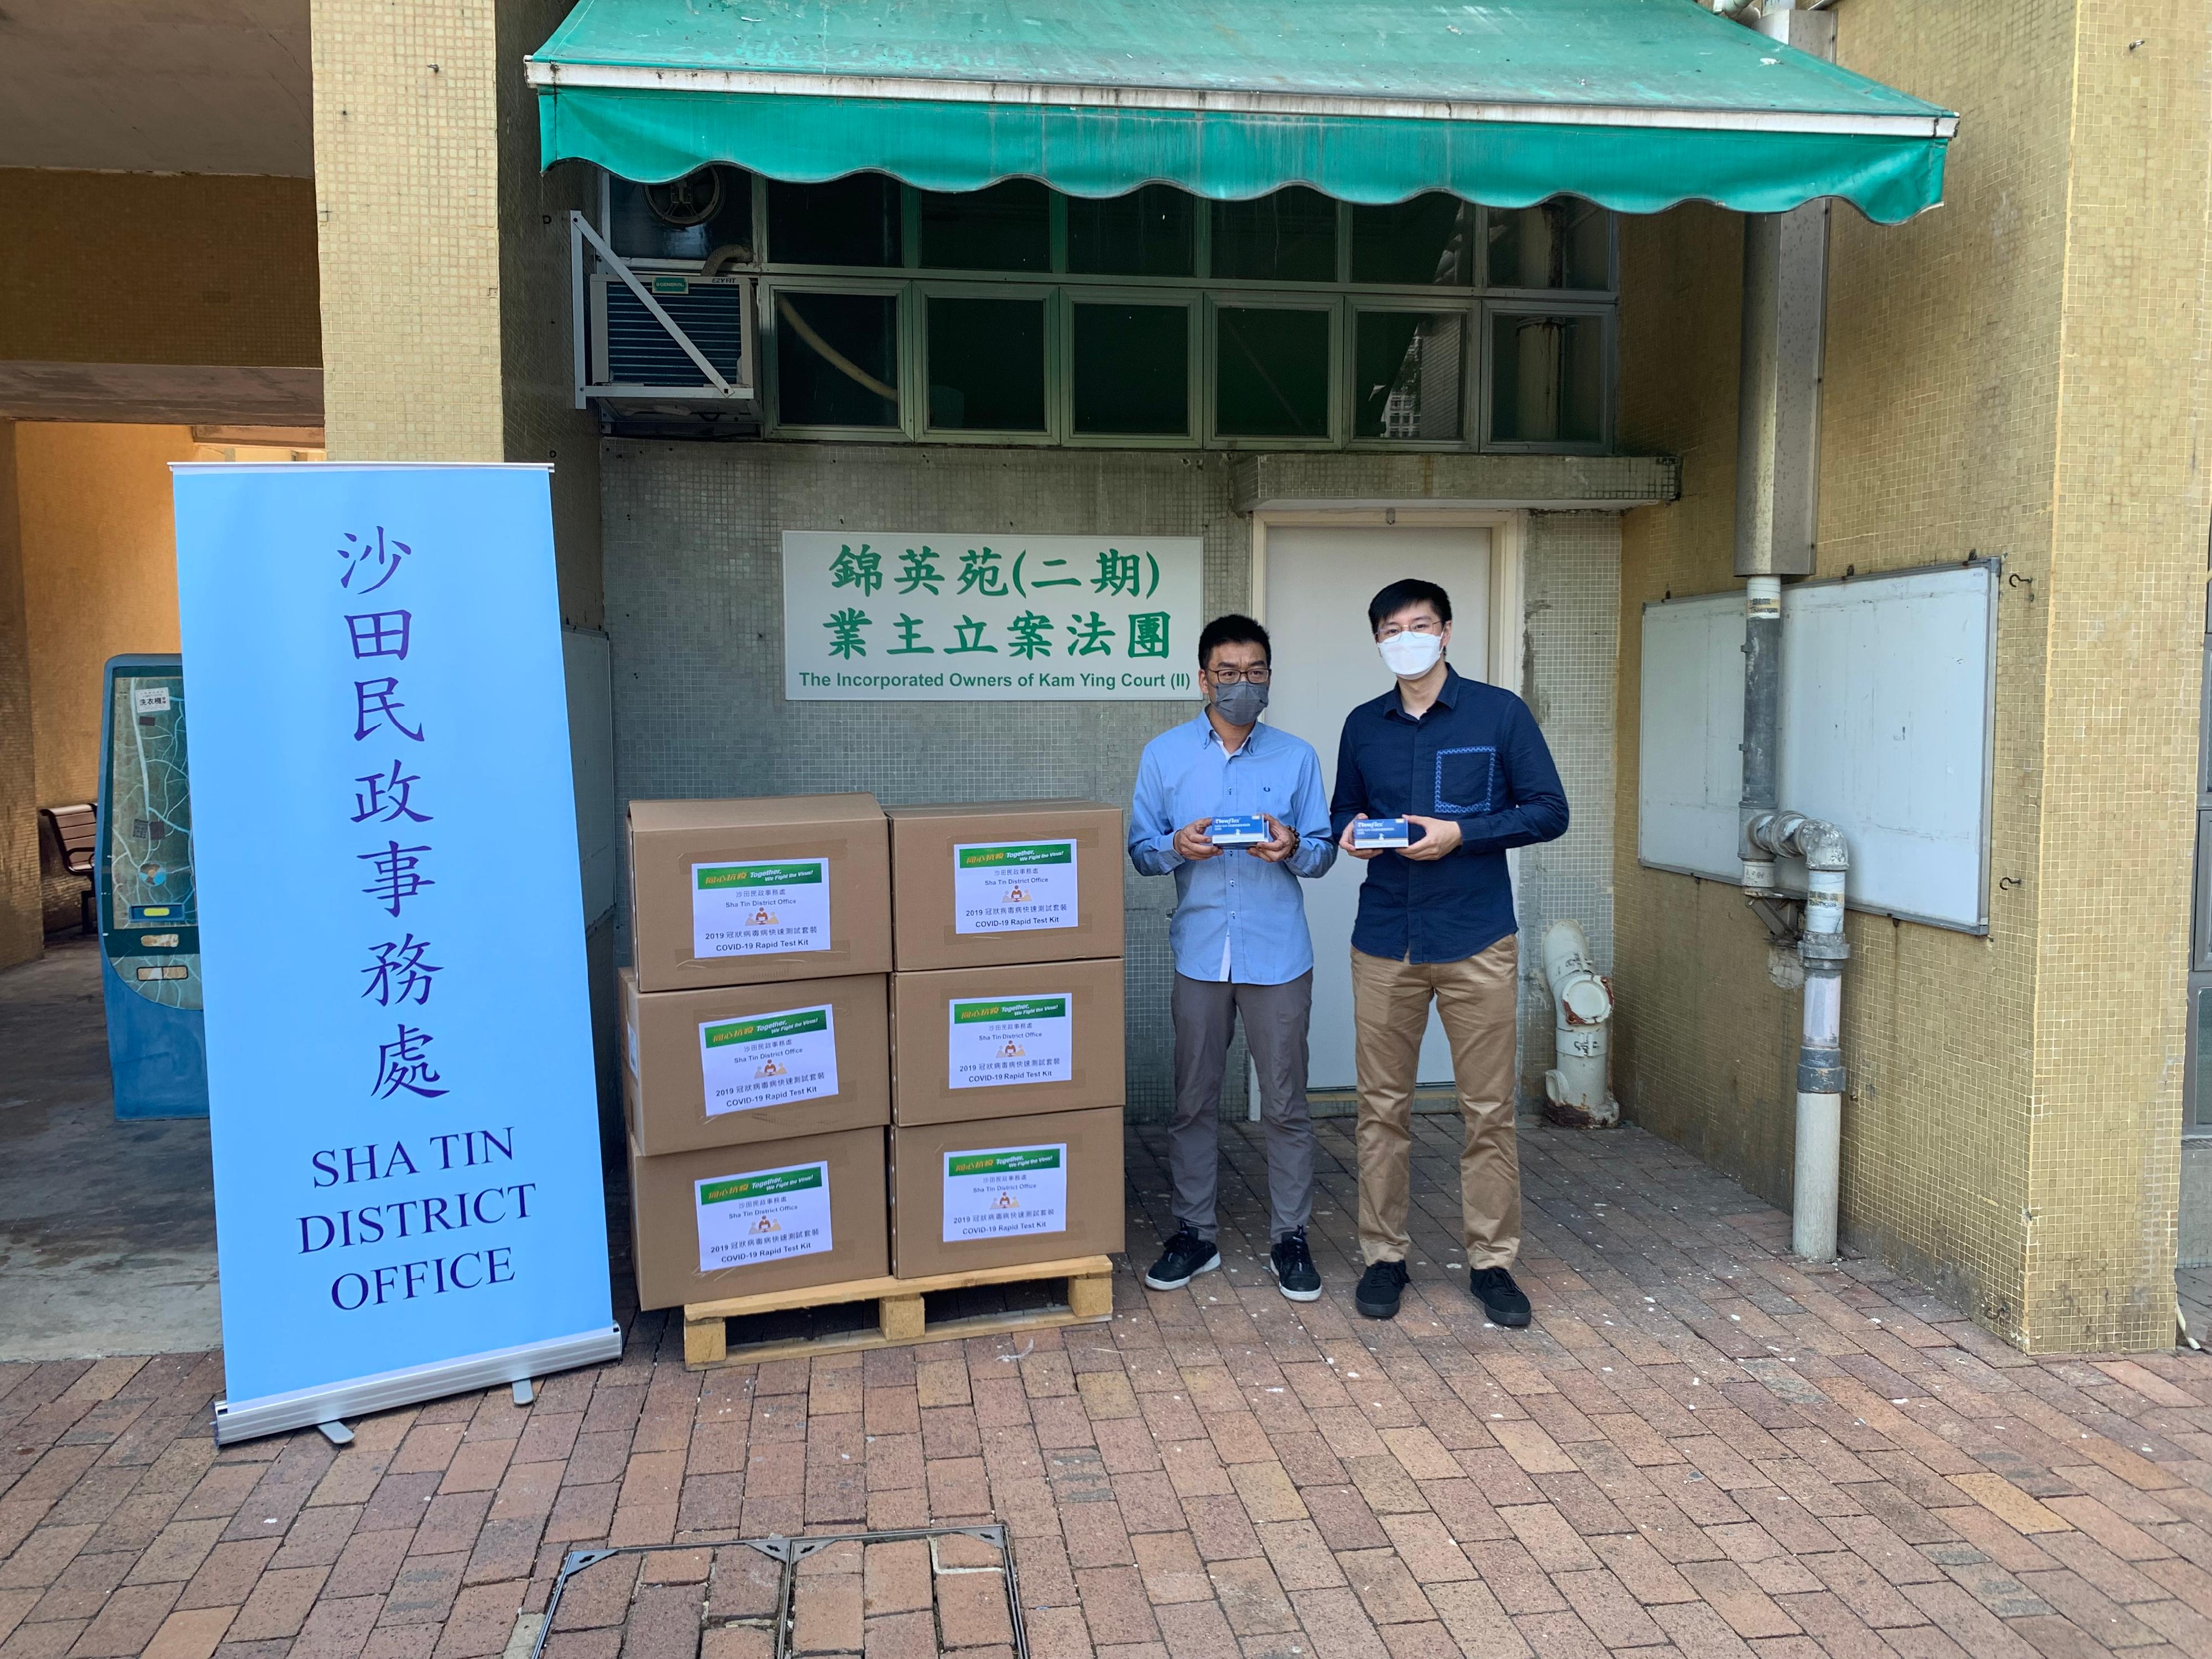 The Sha Tin Office today (June 25) distributed COVID-19 rapid test kits to households, cleansing workers and property management staff living and working in Kam Ying Court for voluntary testing through the property management company.